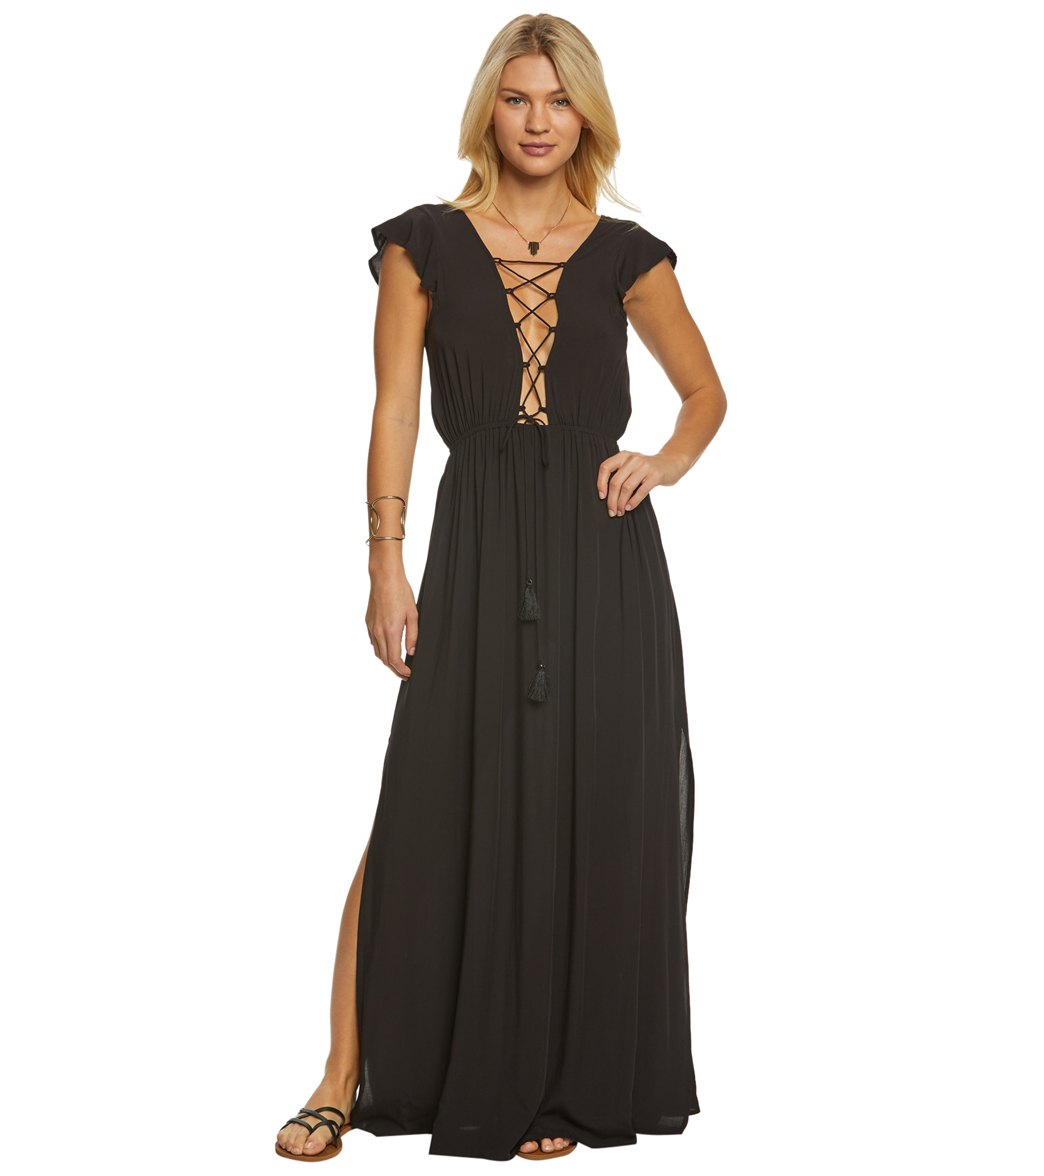 Vince Camuto Riviera Solid Maxi Cover Up Dress at SwimOutlet.com